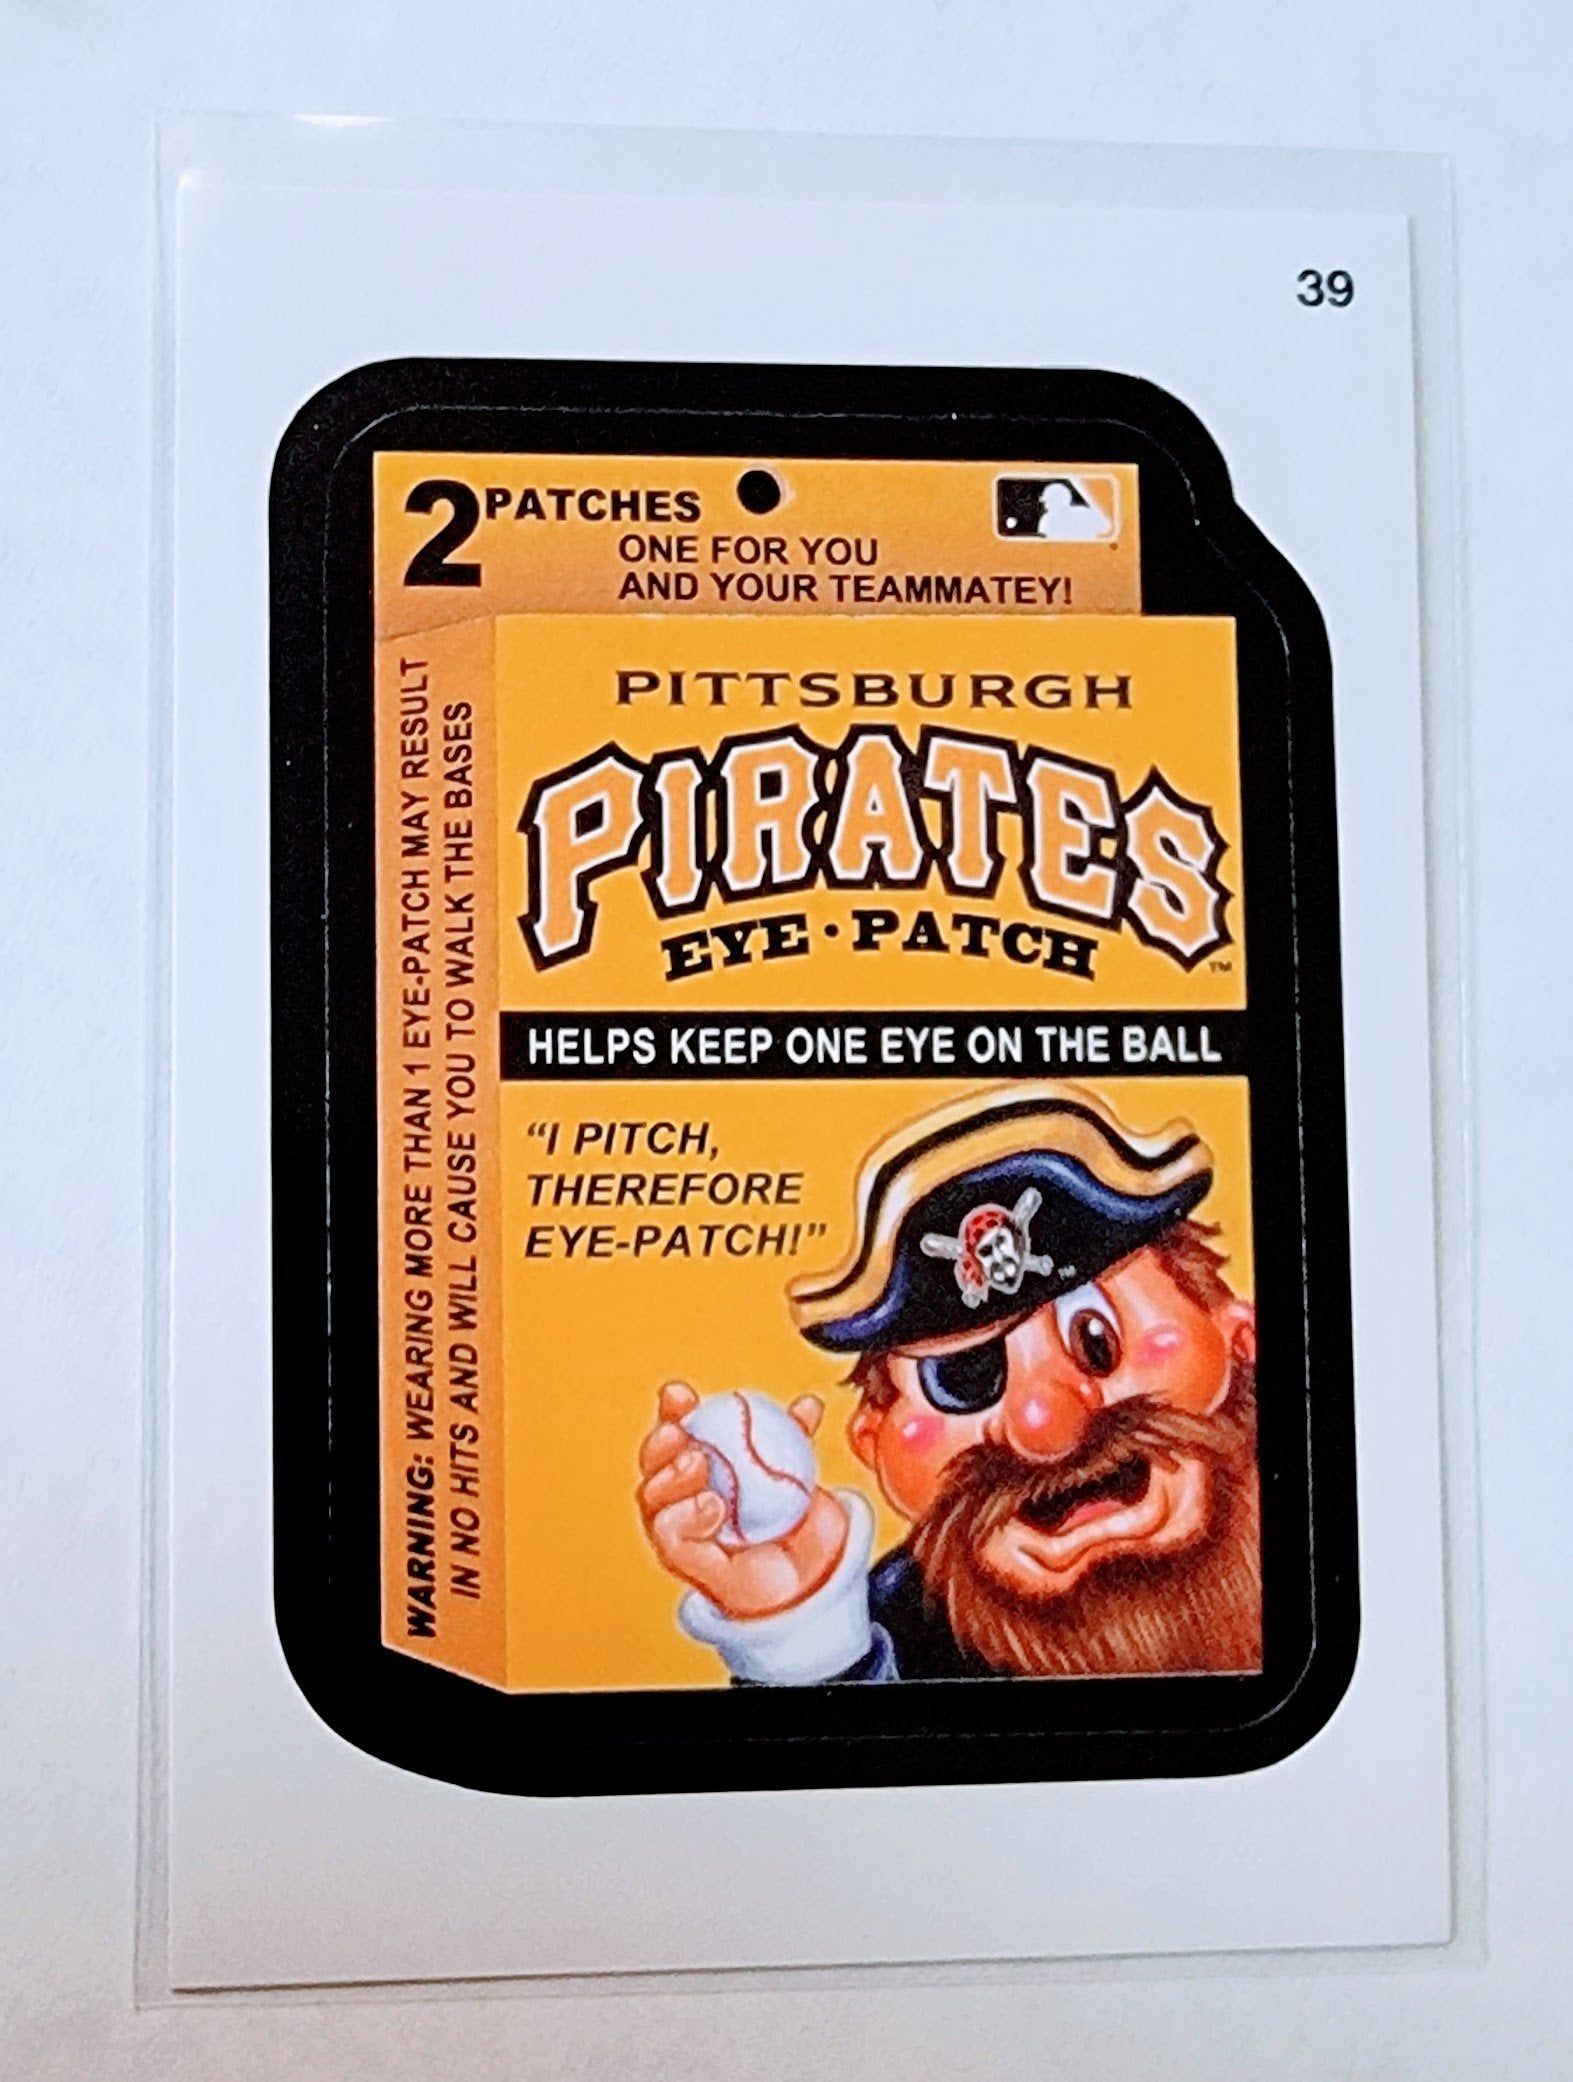 2016 Topps MLB Baseball Wacky Packages Pittsburgh Pirates Eye Patch Sticker Trading Card MCSC1 simple Xclusive Collectibles   